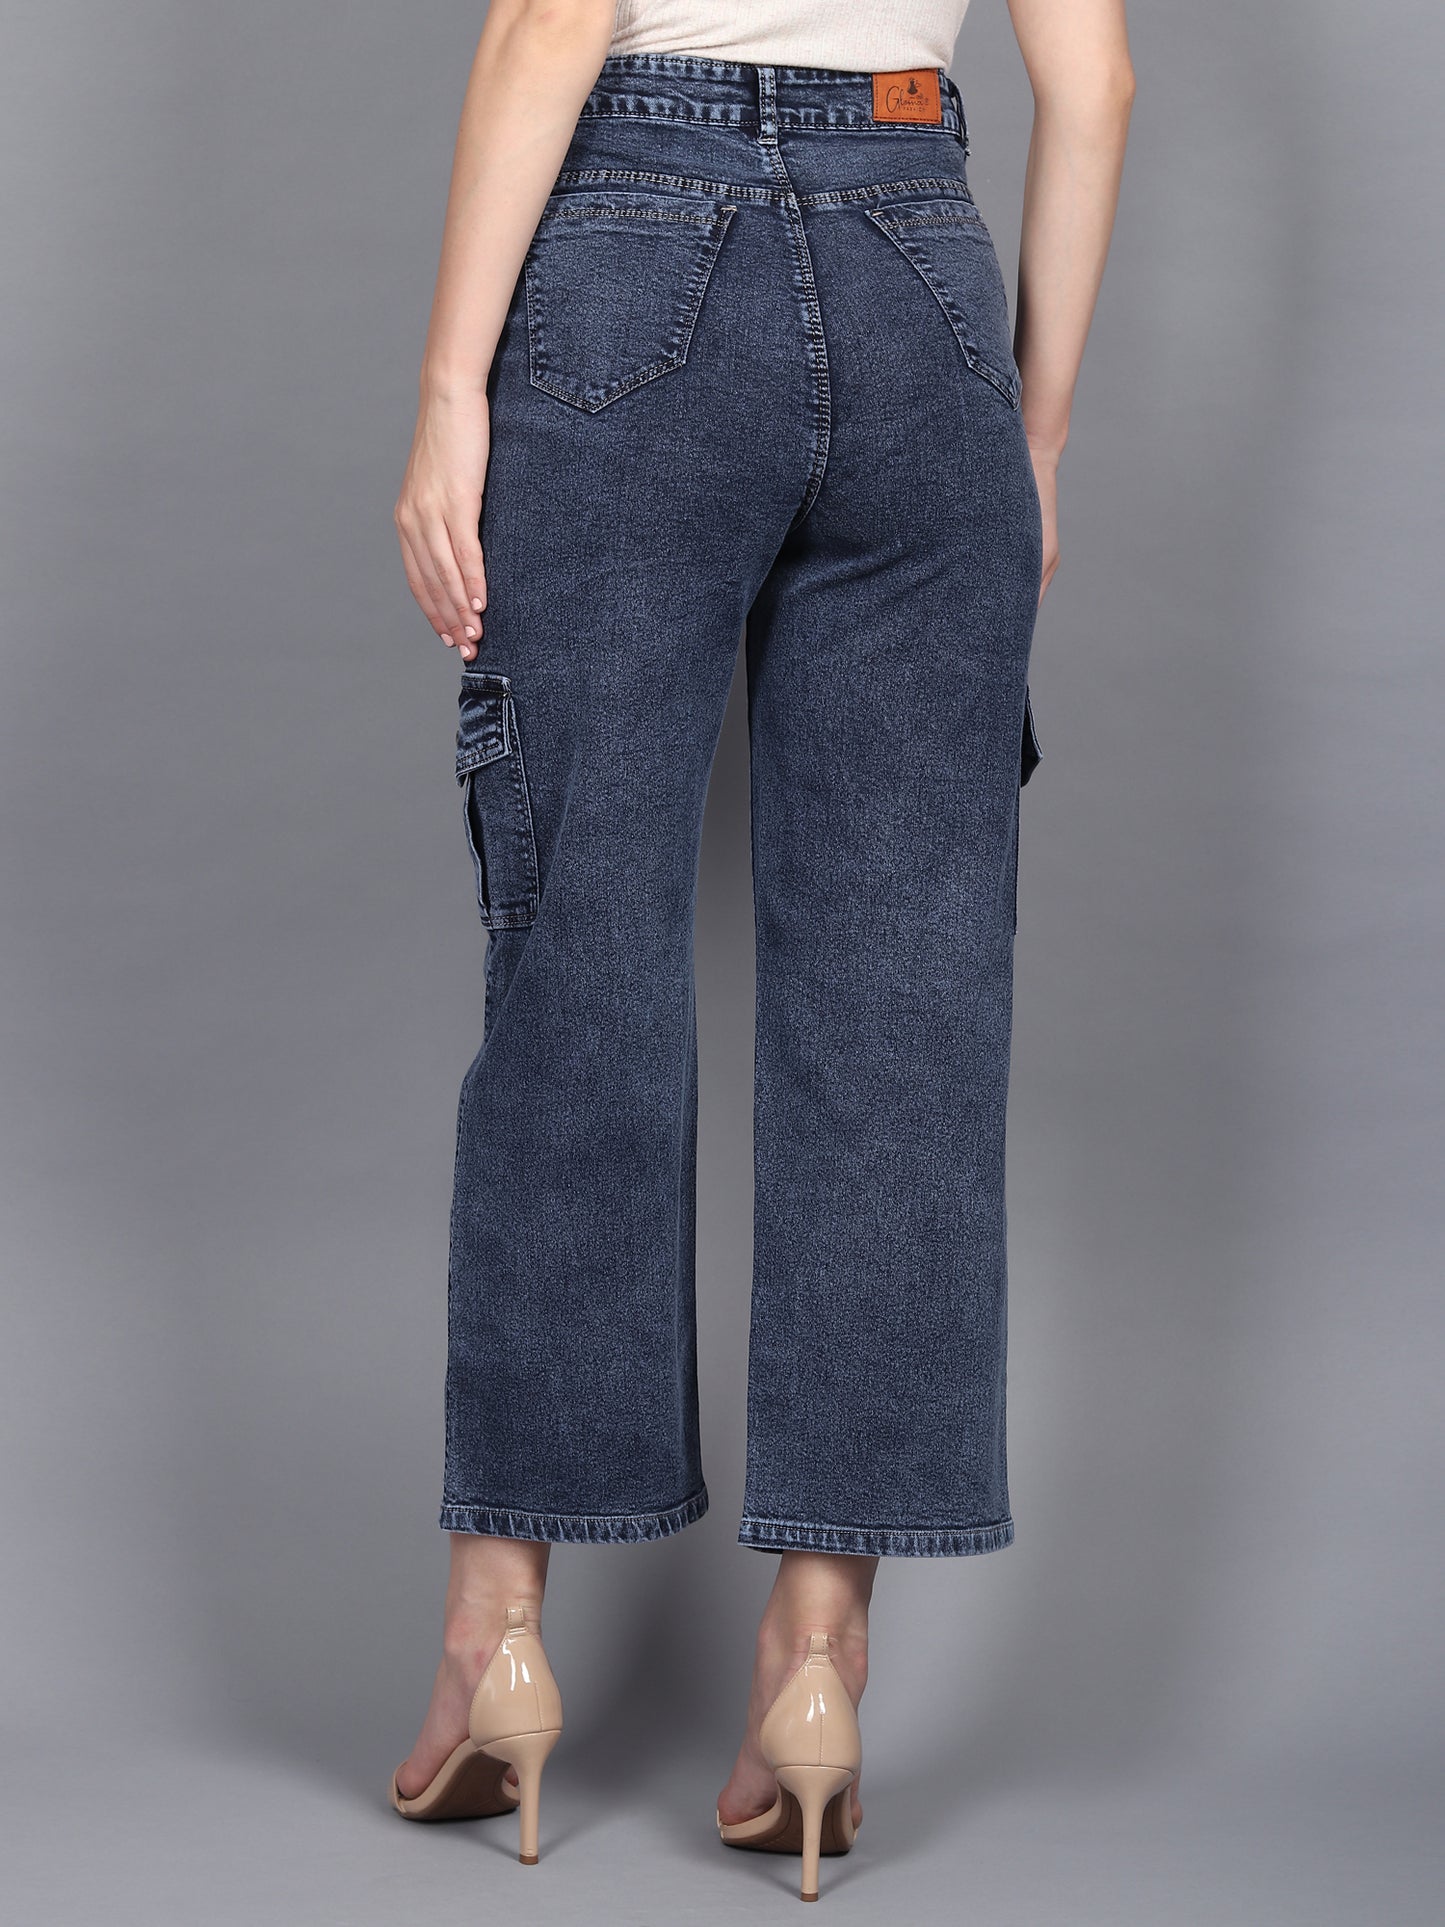 Navy Cargo Jeans For Women High Waist Straight Fit Stretchable Denim - 1215